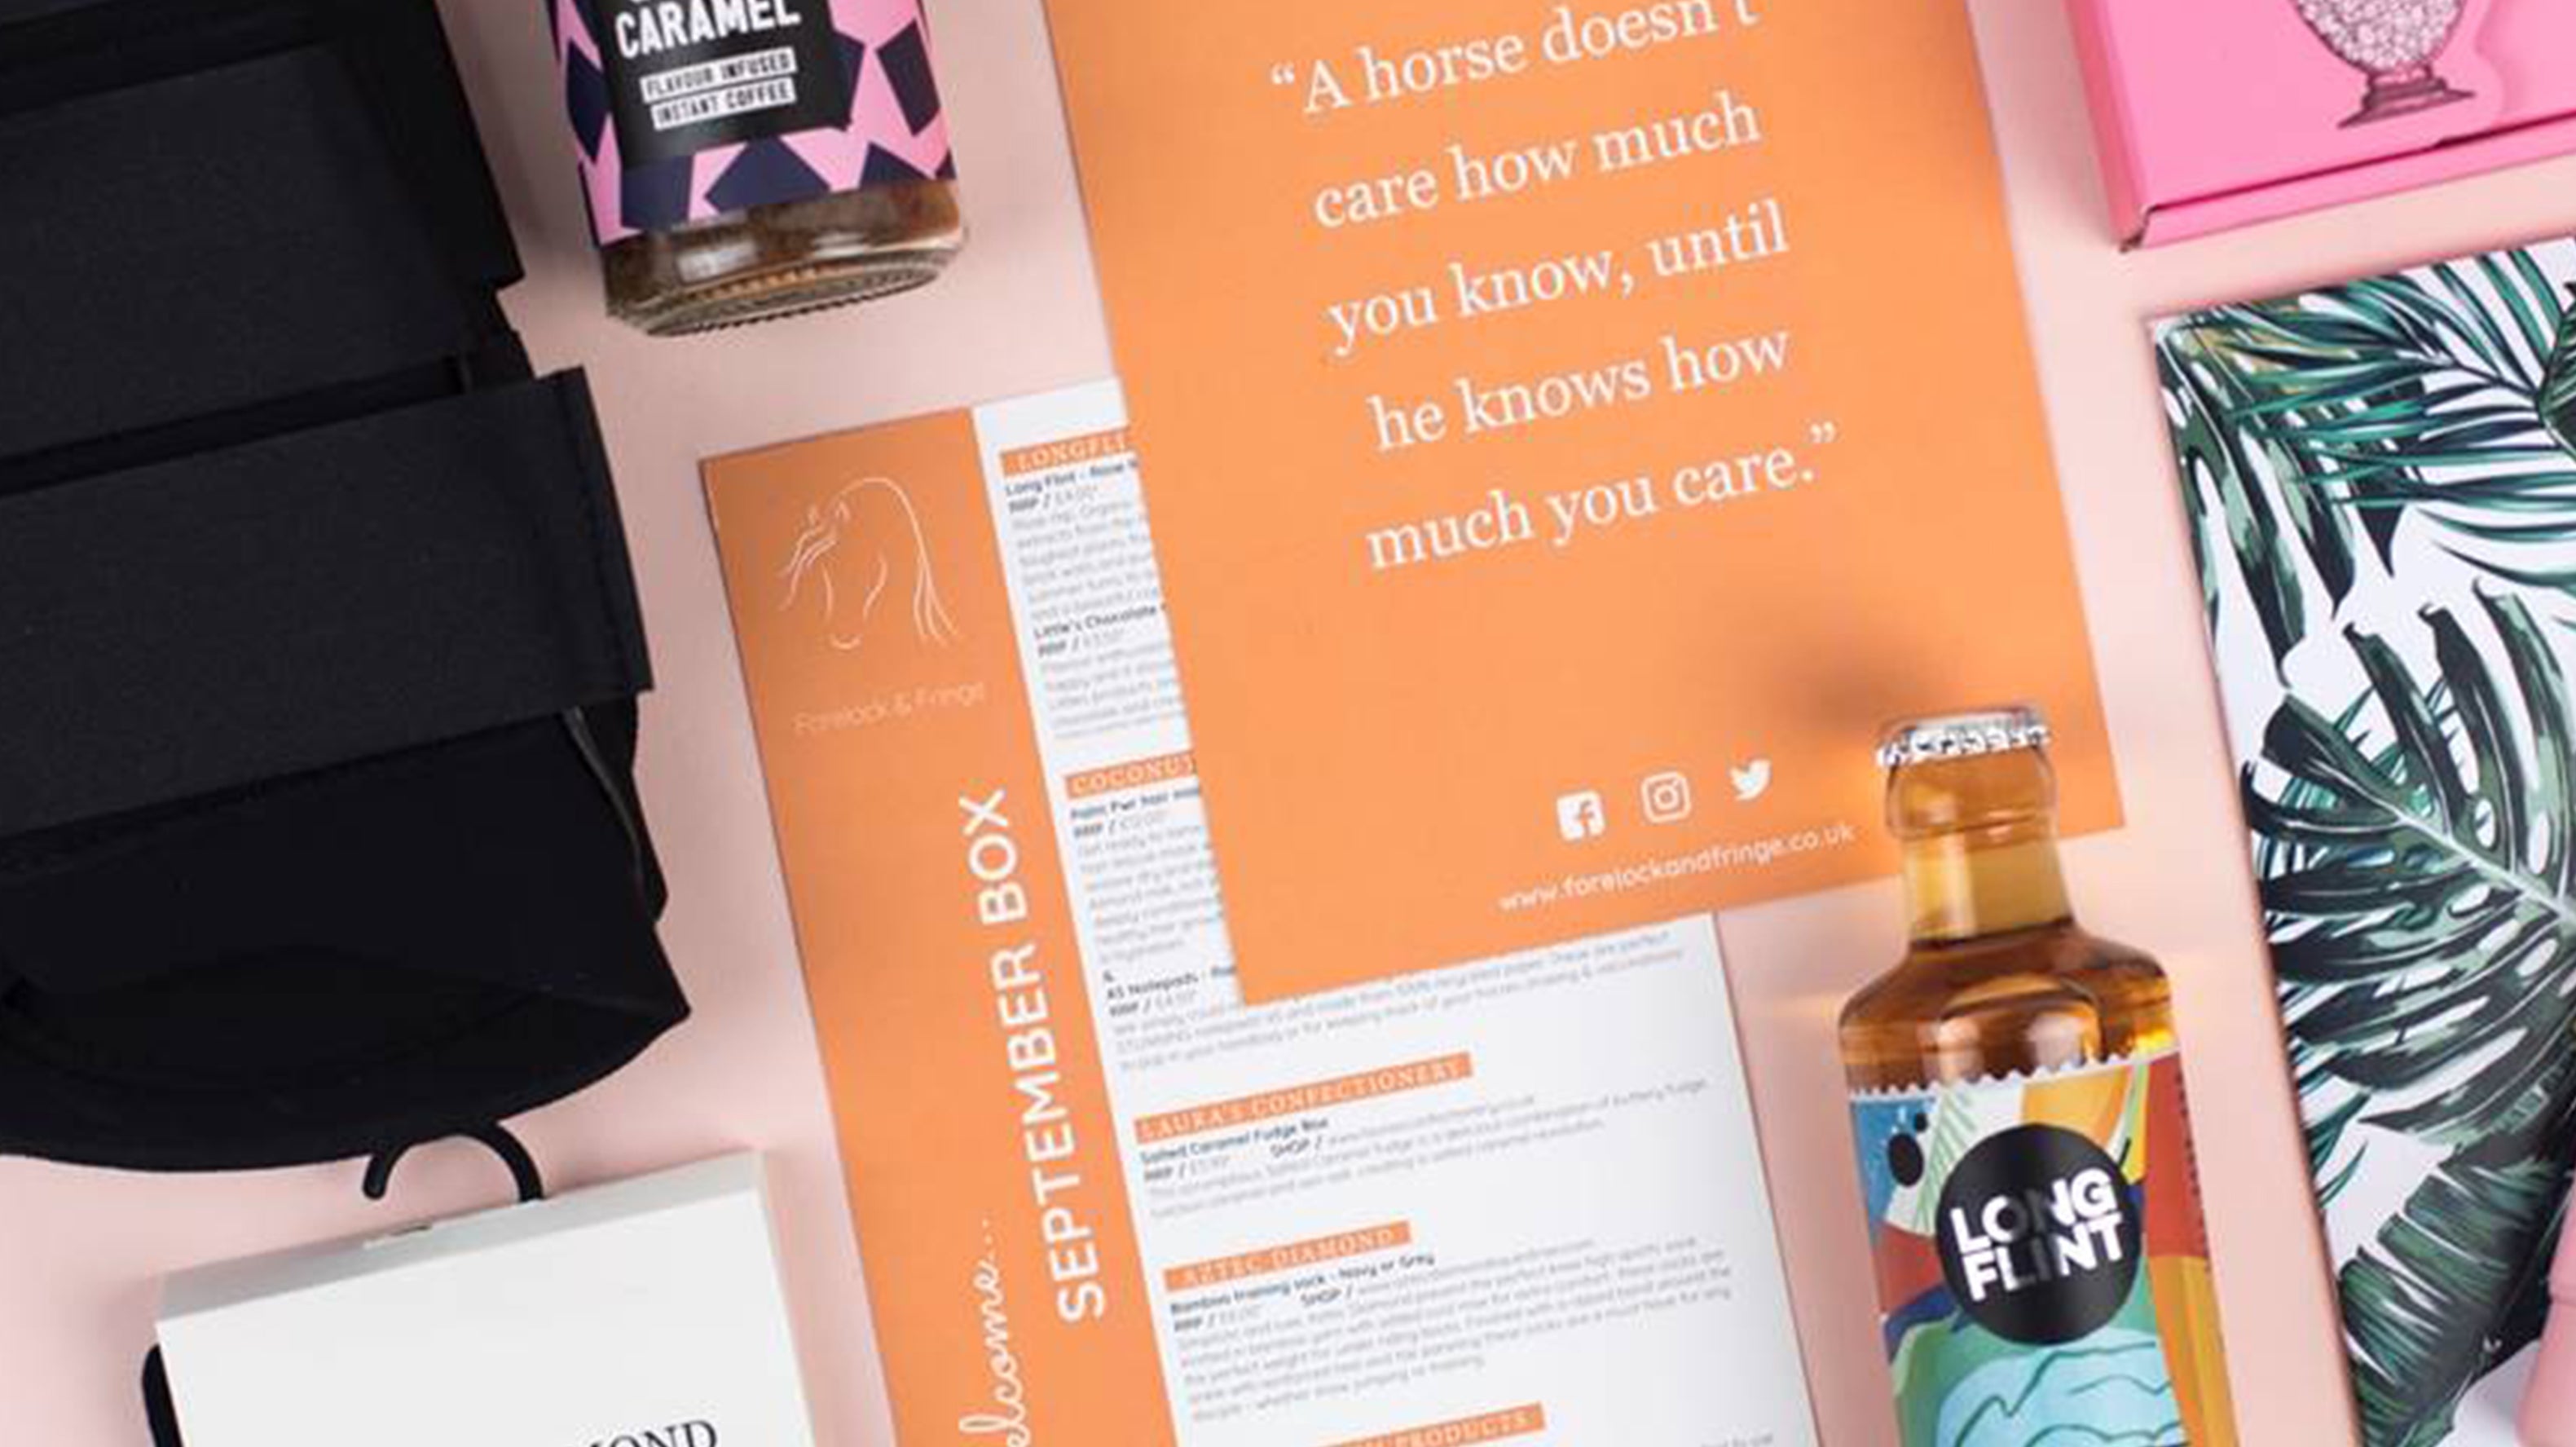 Forelock & Fringe: 5 questions about the must-have equestrian subscription box